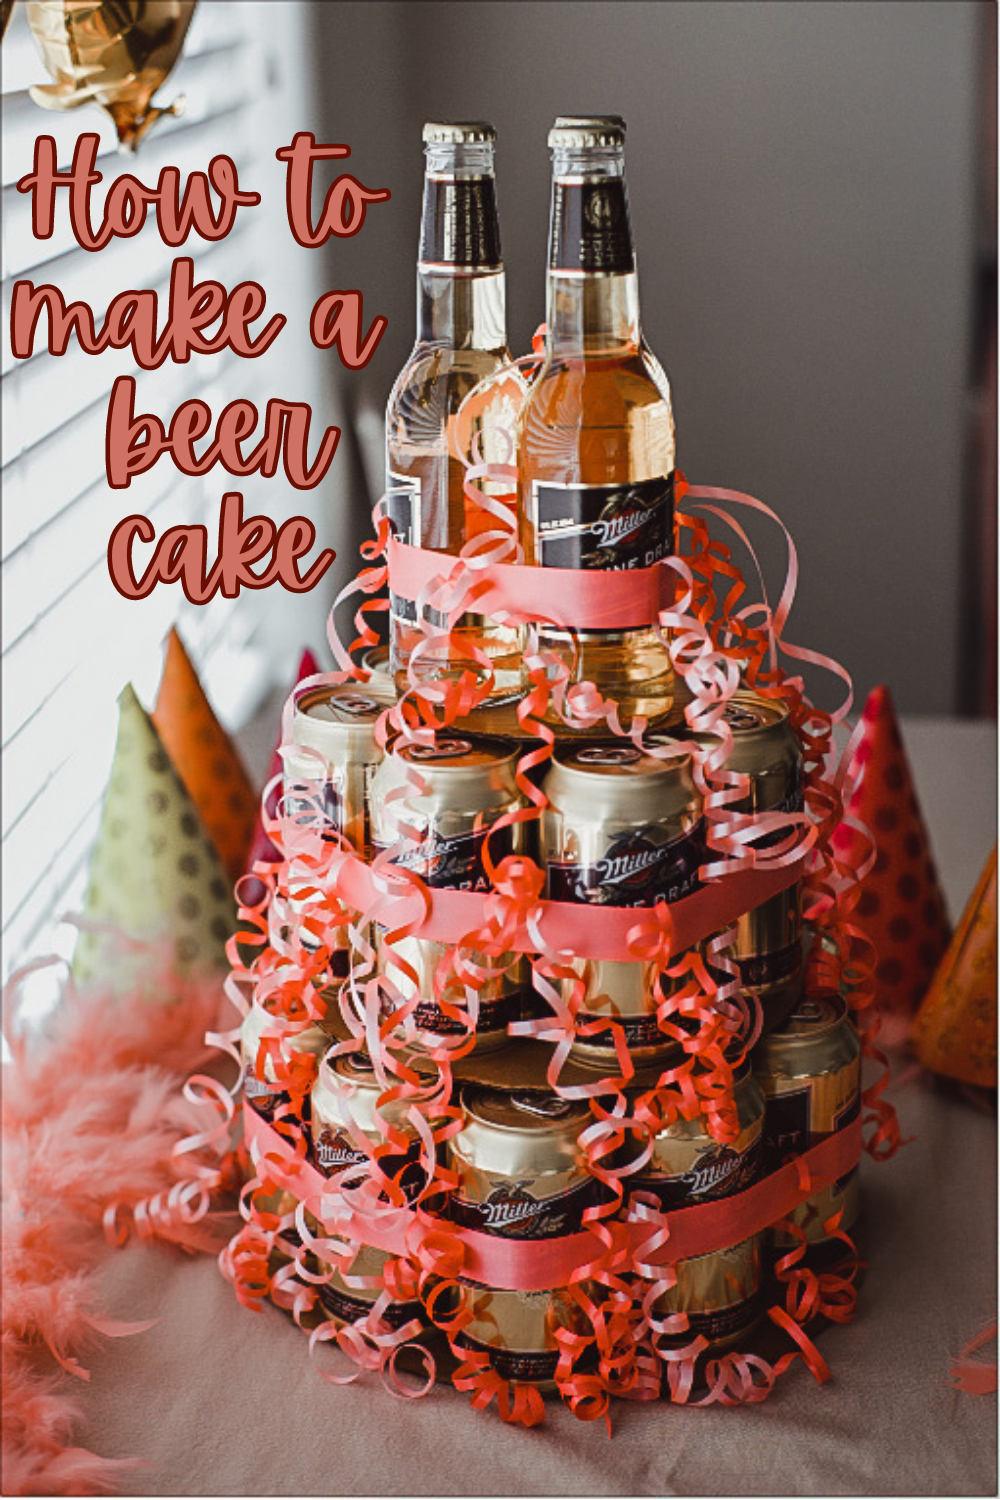 EDIBLE LABELS Custom Beer Bottle Cake Labels for Chocolate or - Etsy